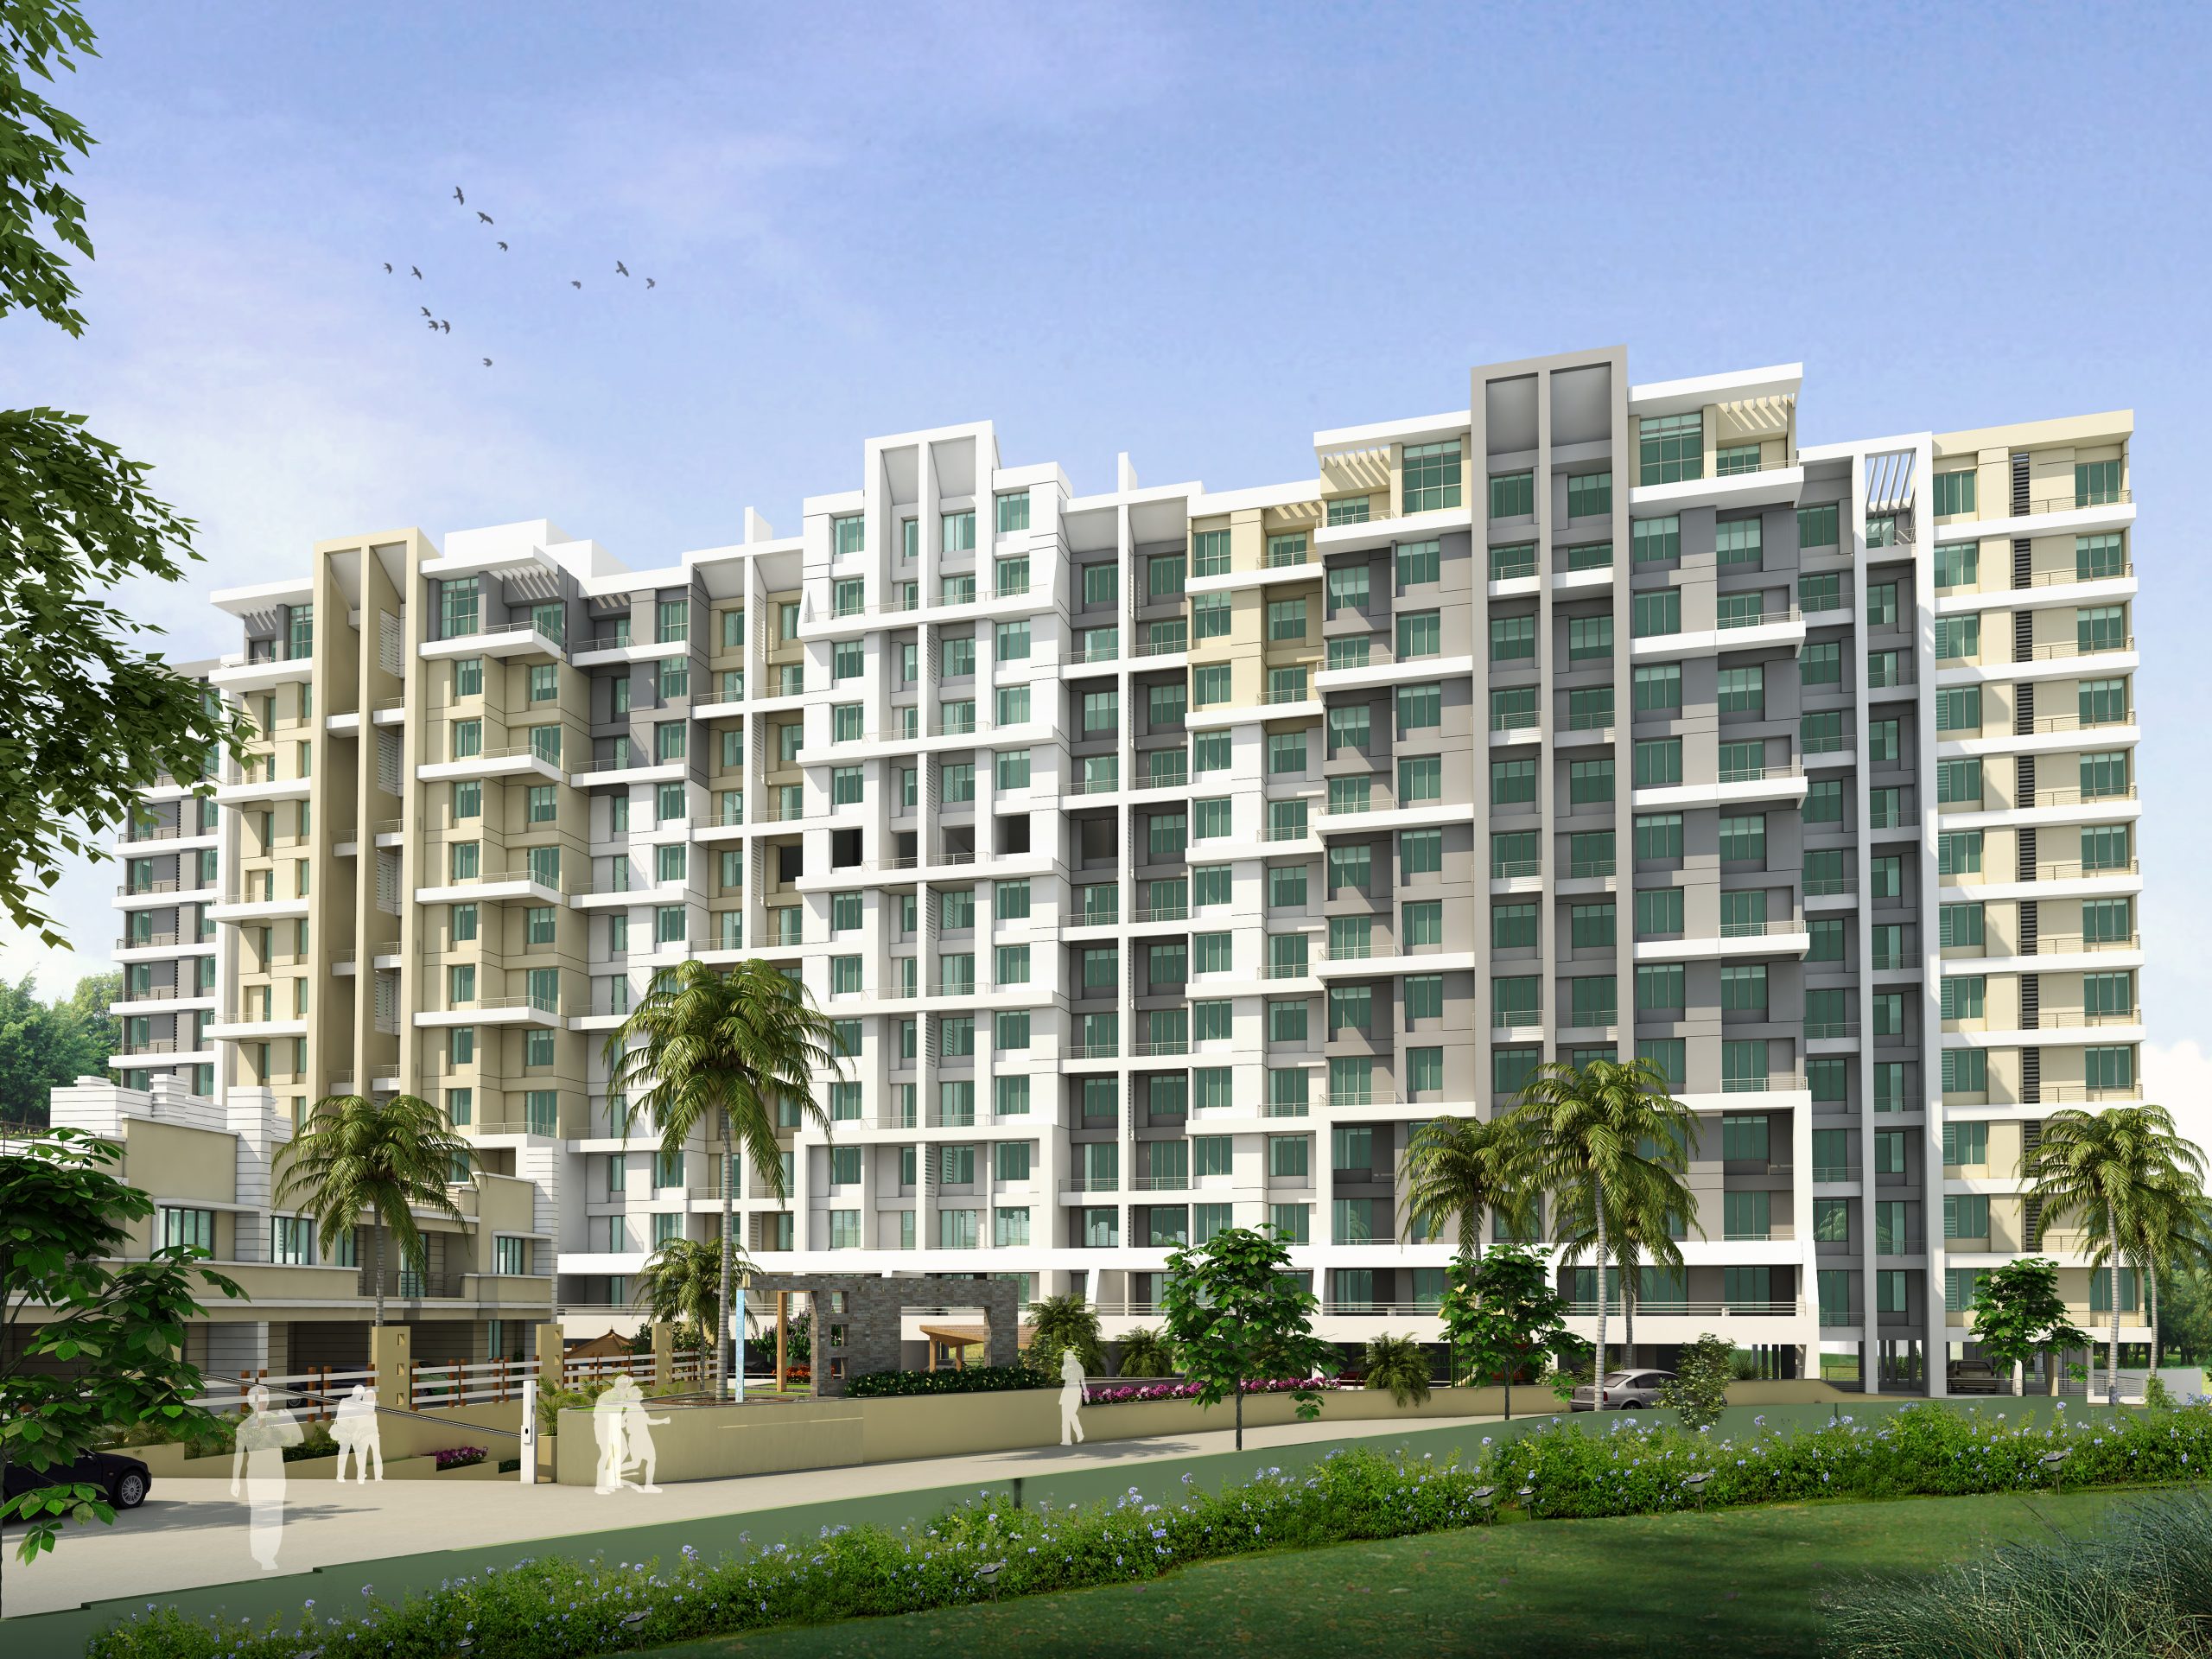 2 & 3 BHK homes in pisoli pune